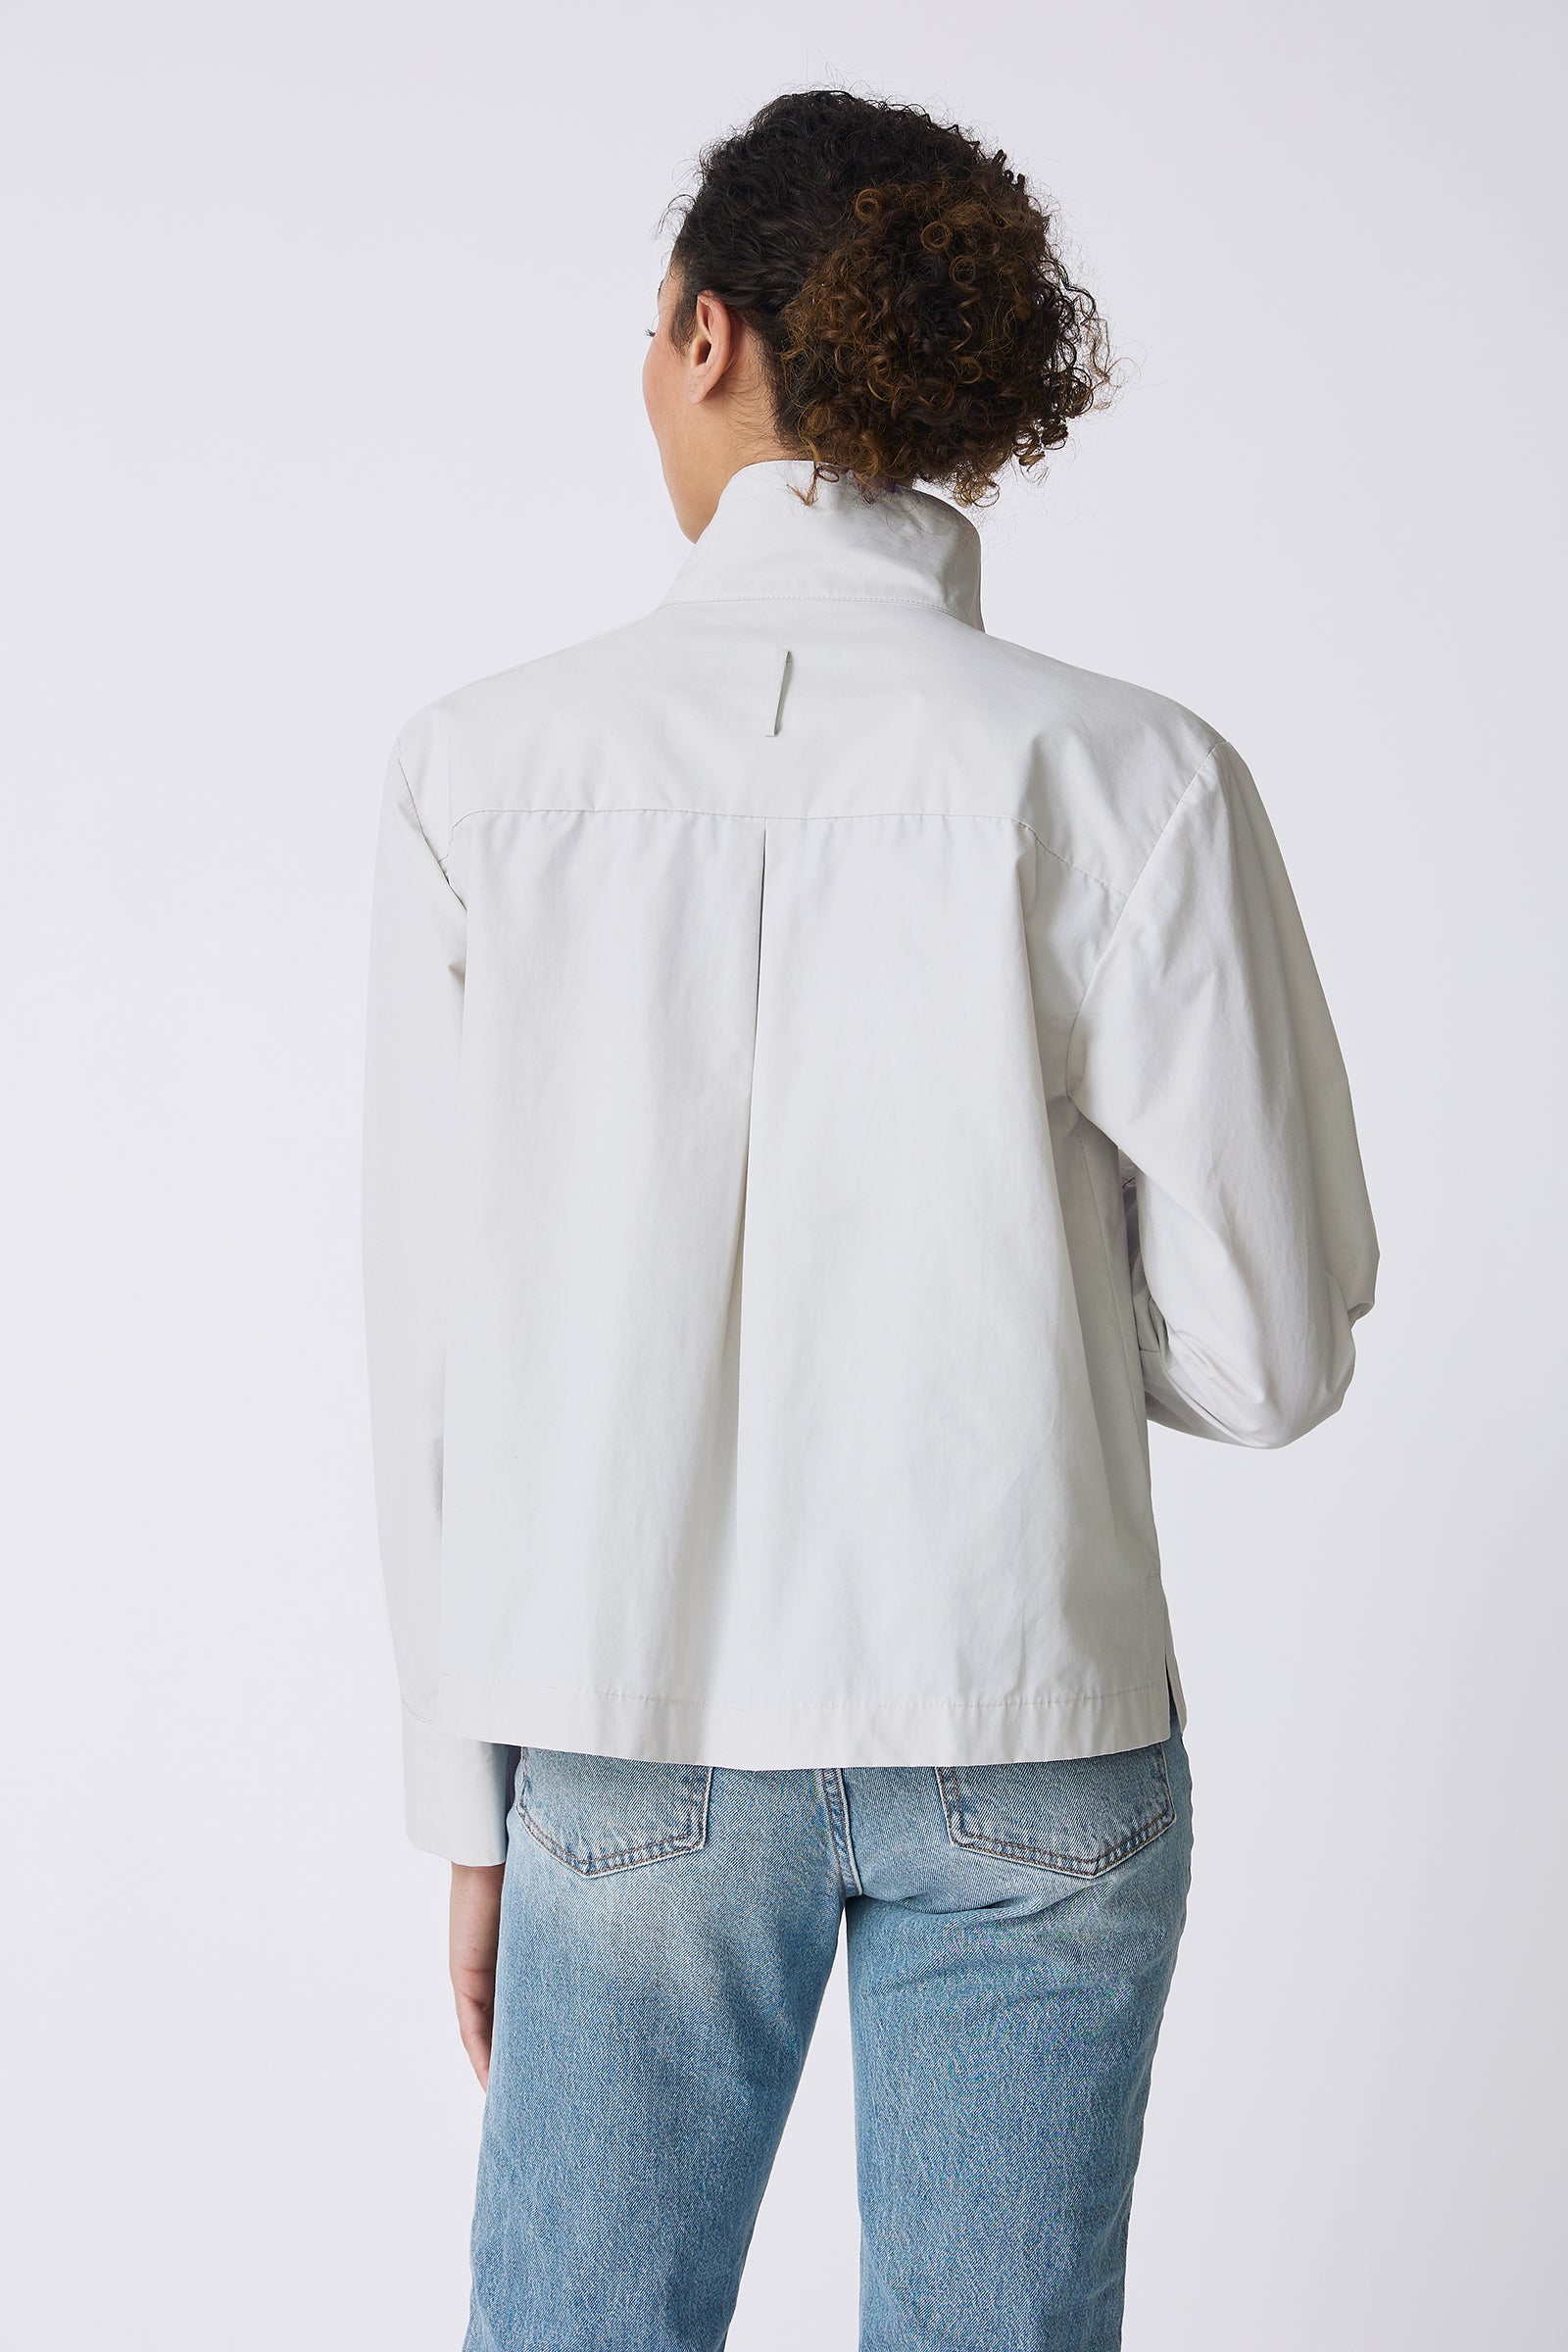 Kal Rieman Peggy Collared Shirt in Stone on model back view